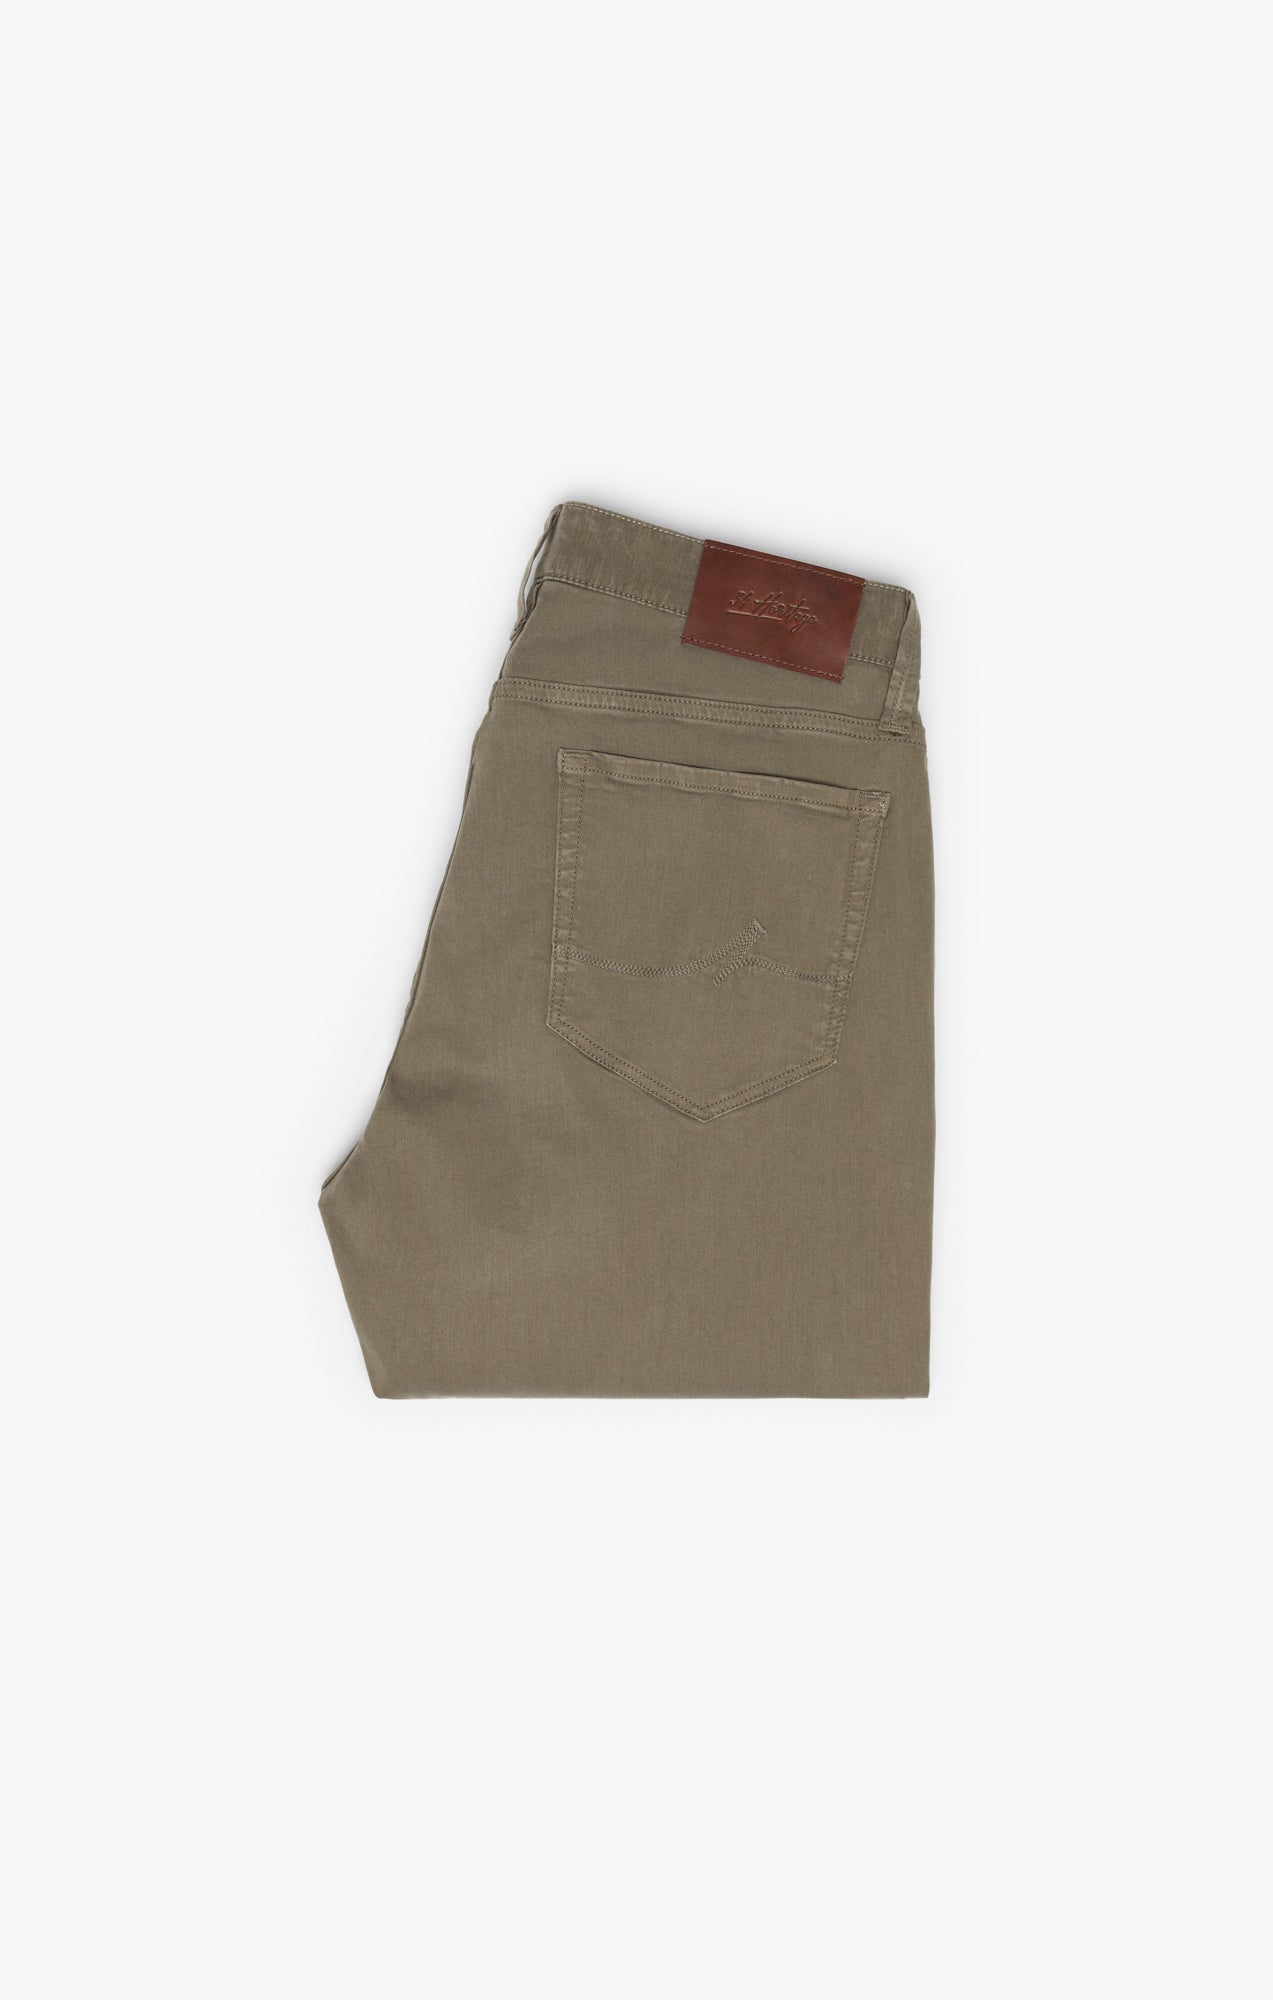 Courage Straight Leg Pants in Canteen Twill Image 8